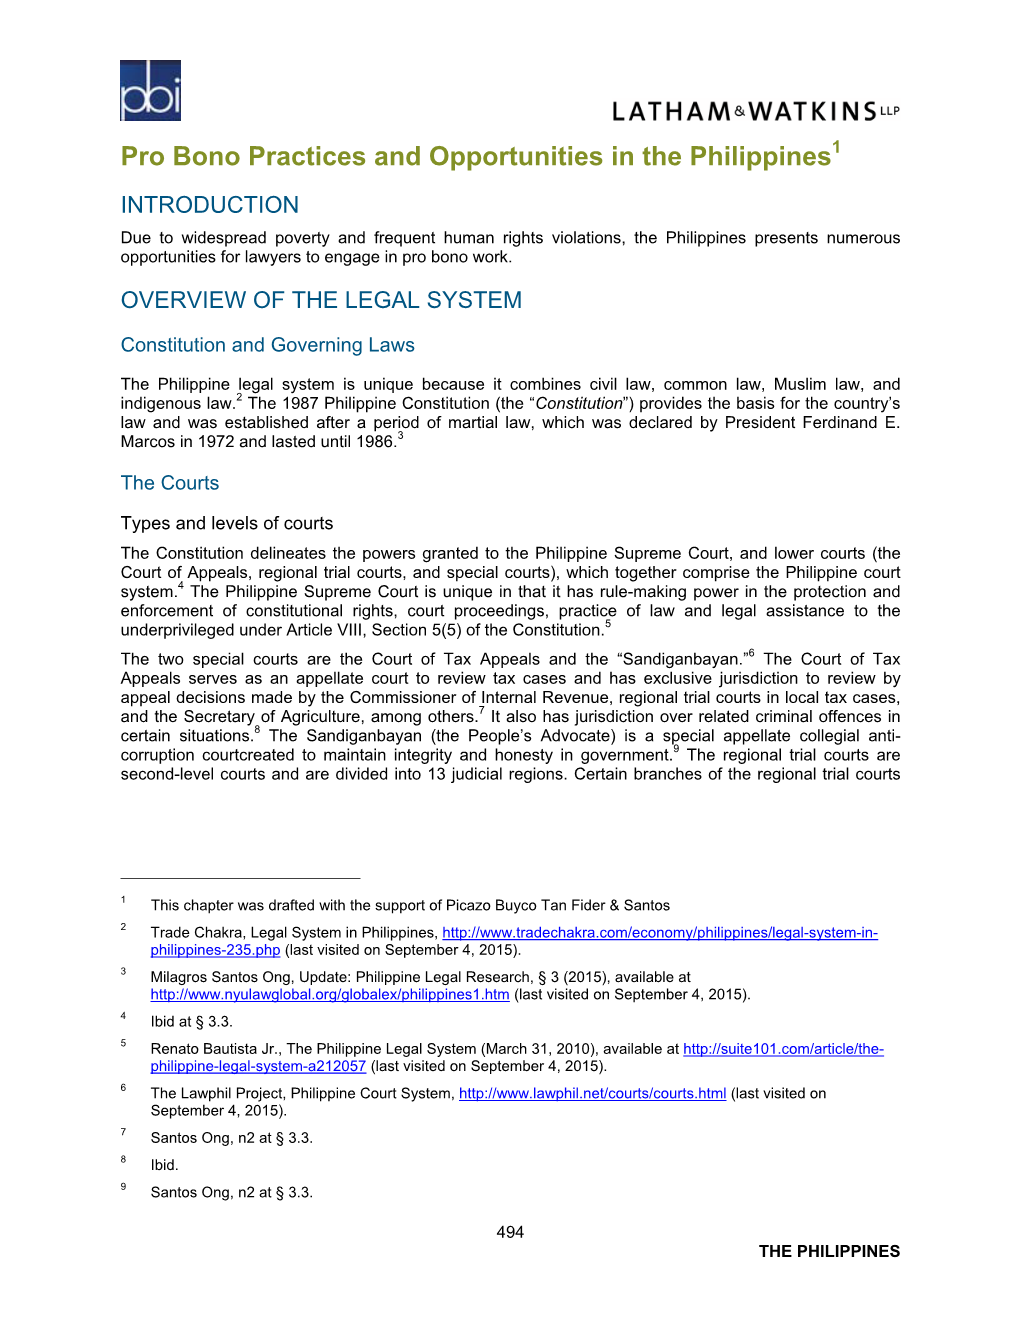 Pro Bono Practices and Opportunities in the Philippines1